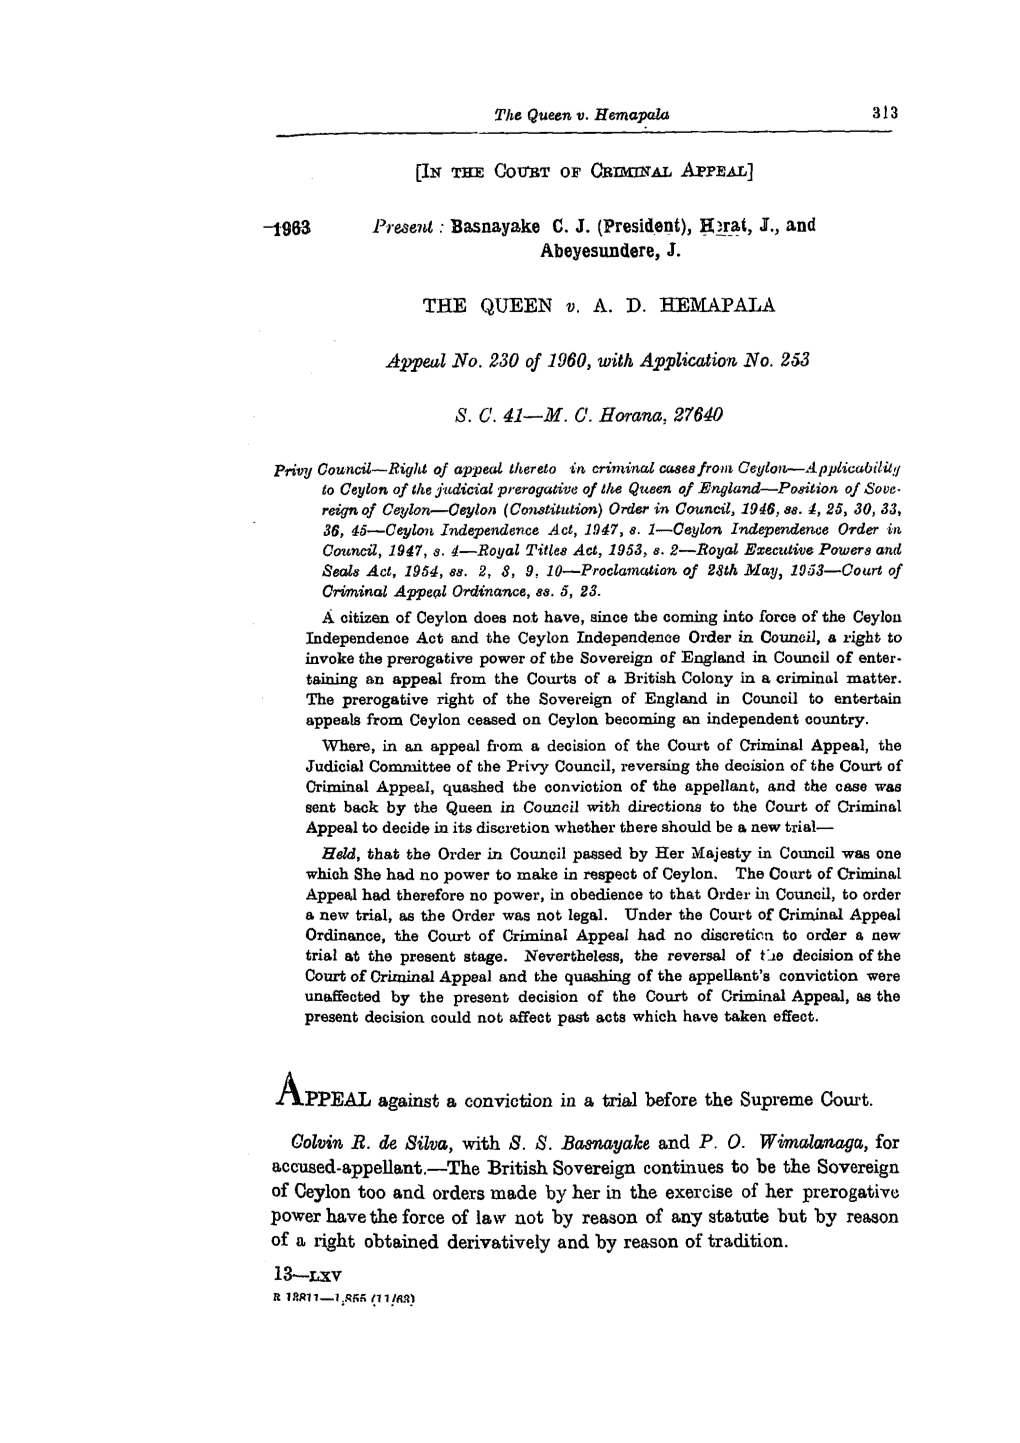 313 Appeal No. 230 of 1960, with Application No. 263 S. C. 41—M. C